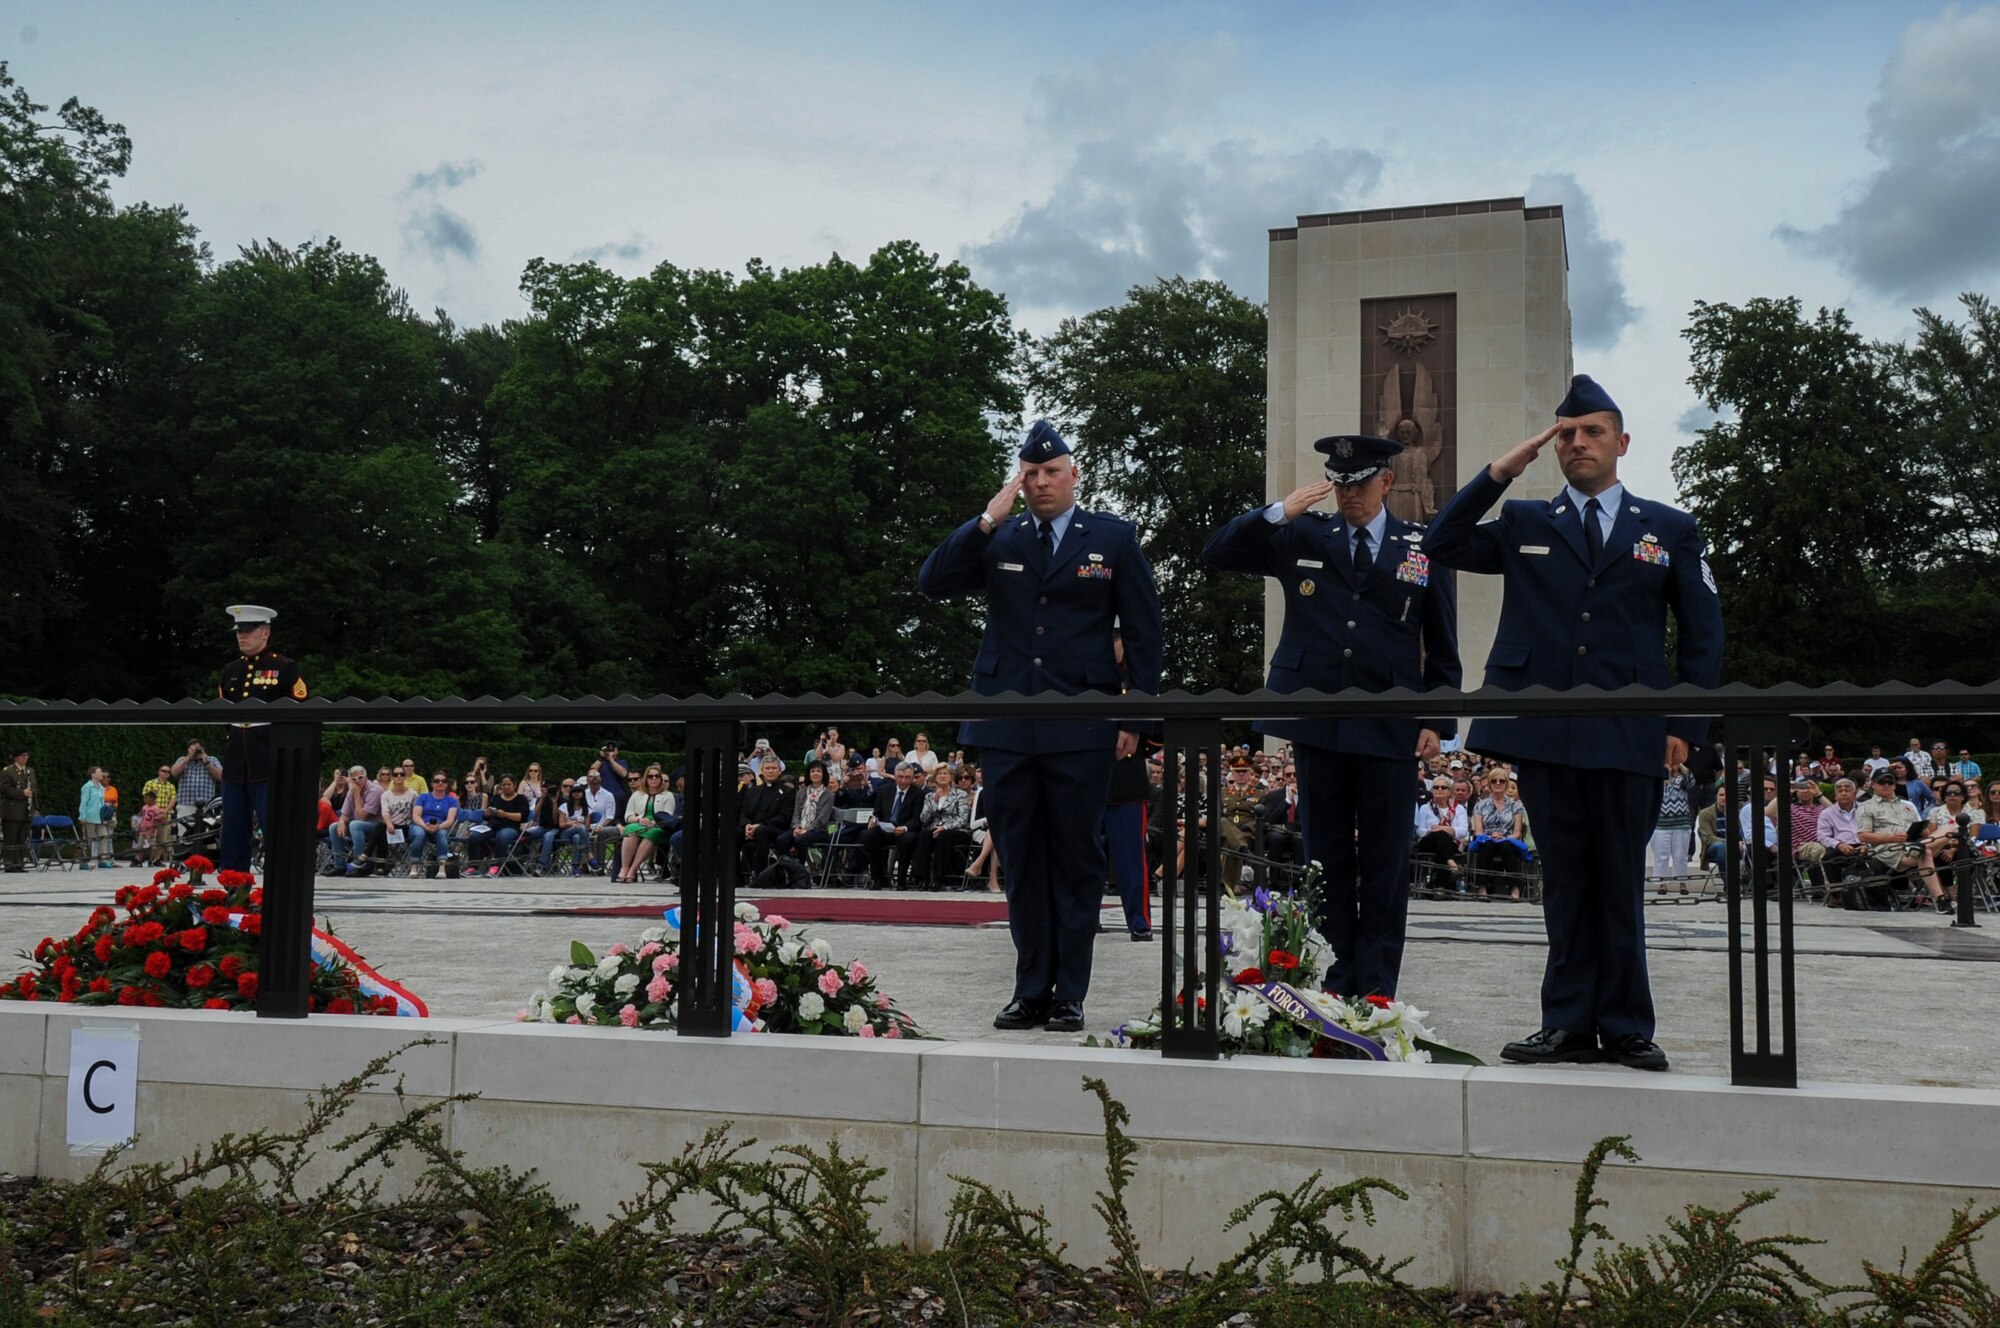 U.S. Air Force Lt. Gen. Timothy Ray, 3rd Air Force and 17th Expeditionary Air Force commander, center, salutes a wreath during a Memorial Day ceremony at the Luxembourg American Cemetery and Memorial in Luxembourg, May 28, 2016. More than 200 Luxembourgers and Americans gathered at the cemetery to reflect on the sacrifices made by fallen U.S. service members. (U.S. Air Force photo by Staff Sgt. Joe W. McFadden/Released)  